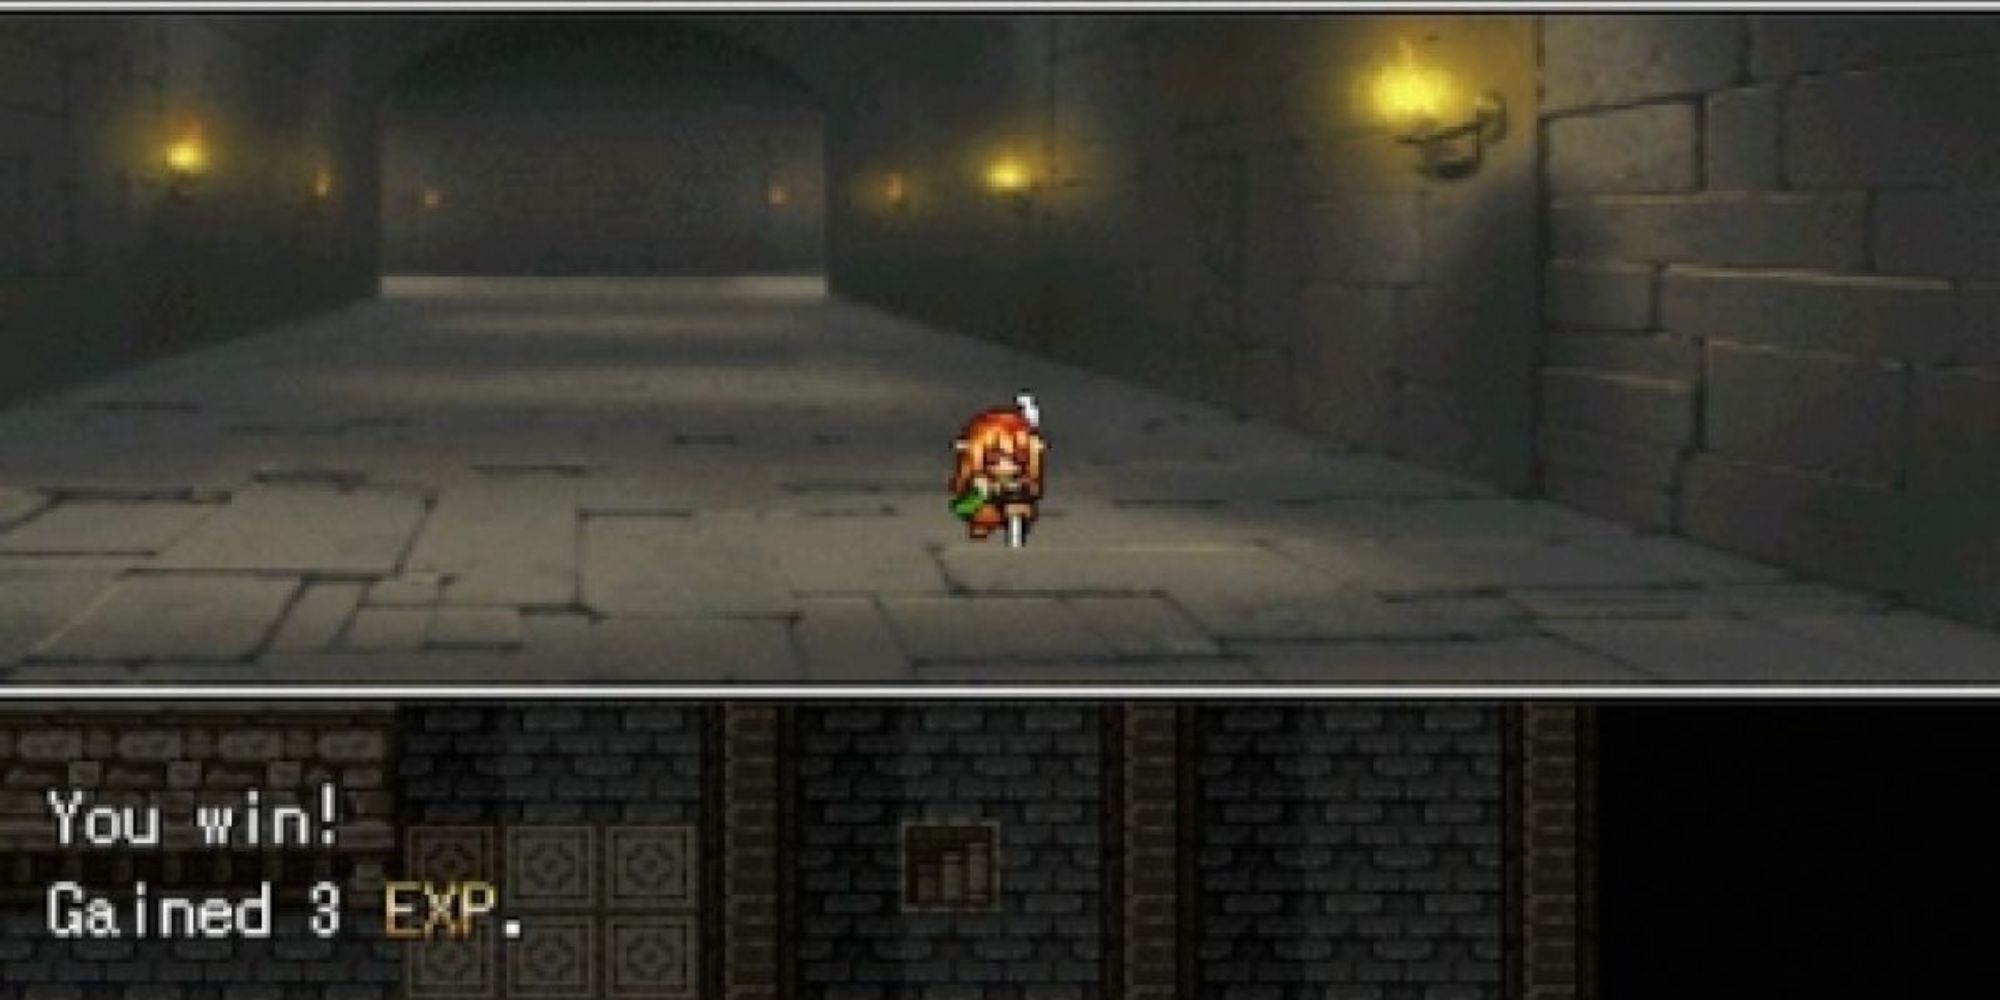 The player gaining 3 experience in Helen's Mysterious Castle